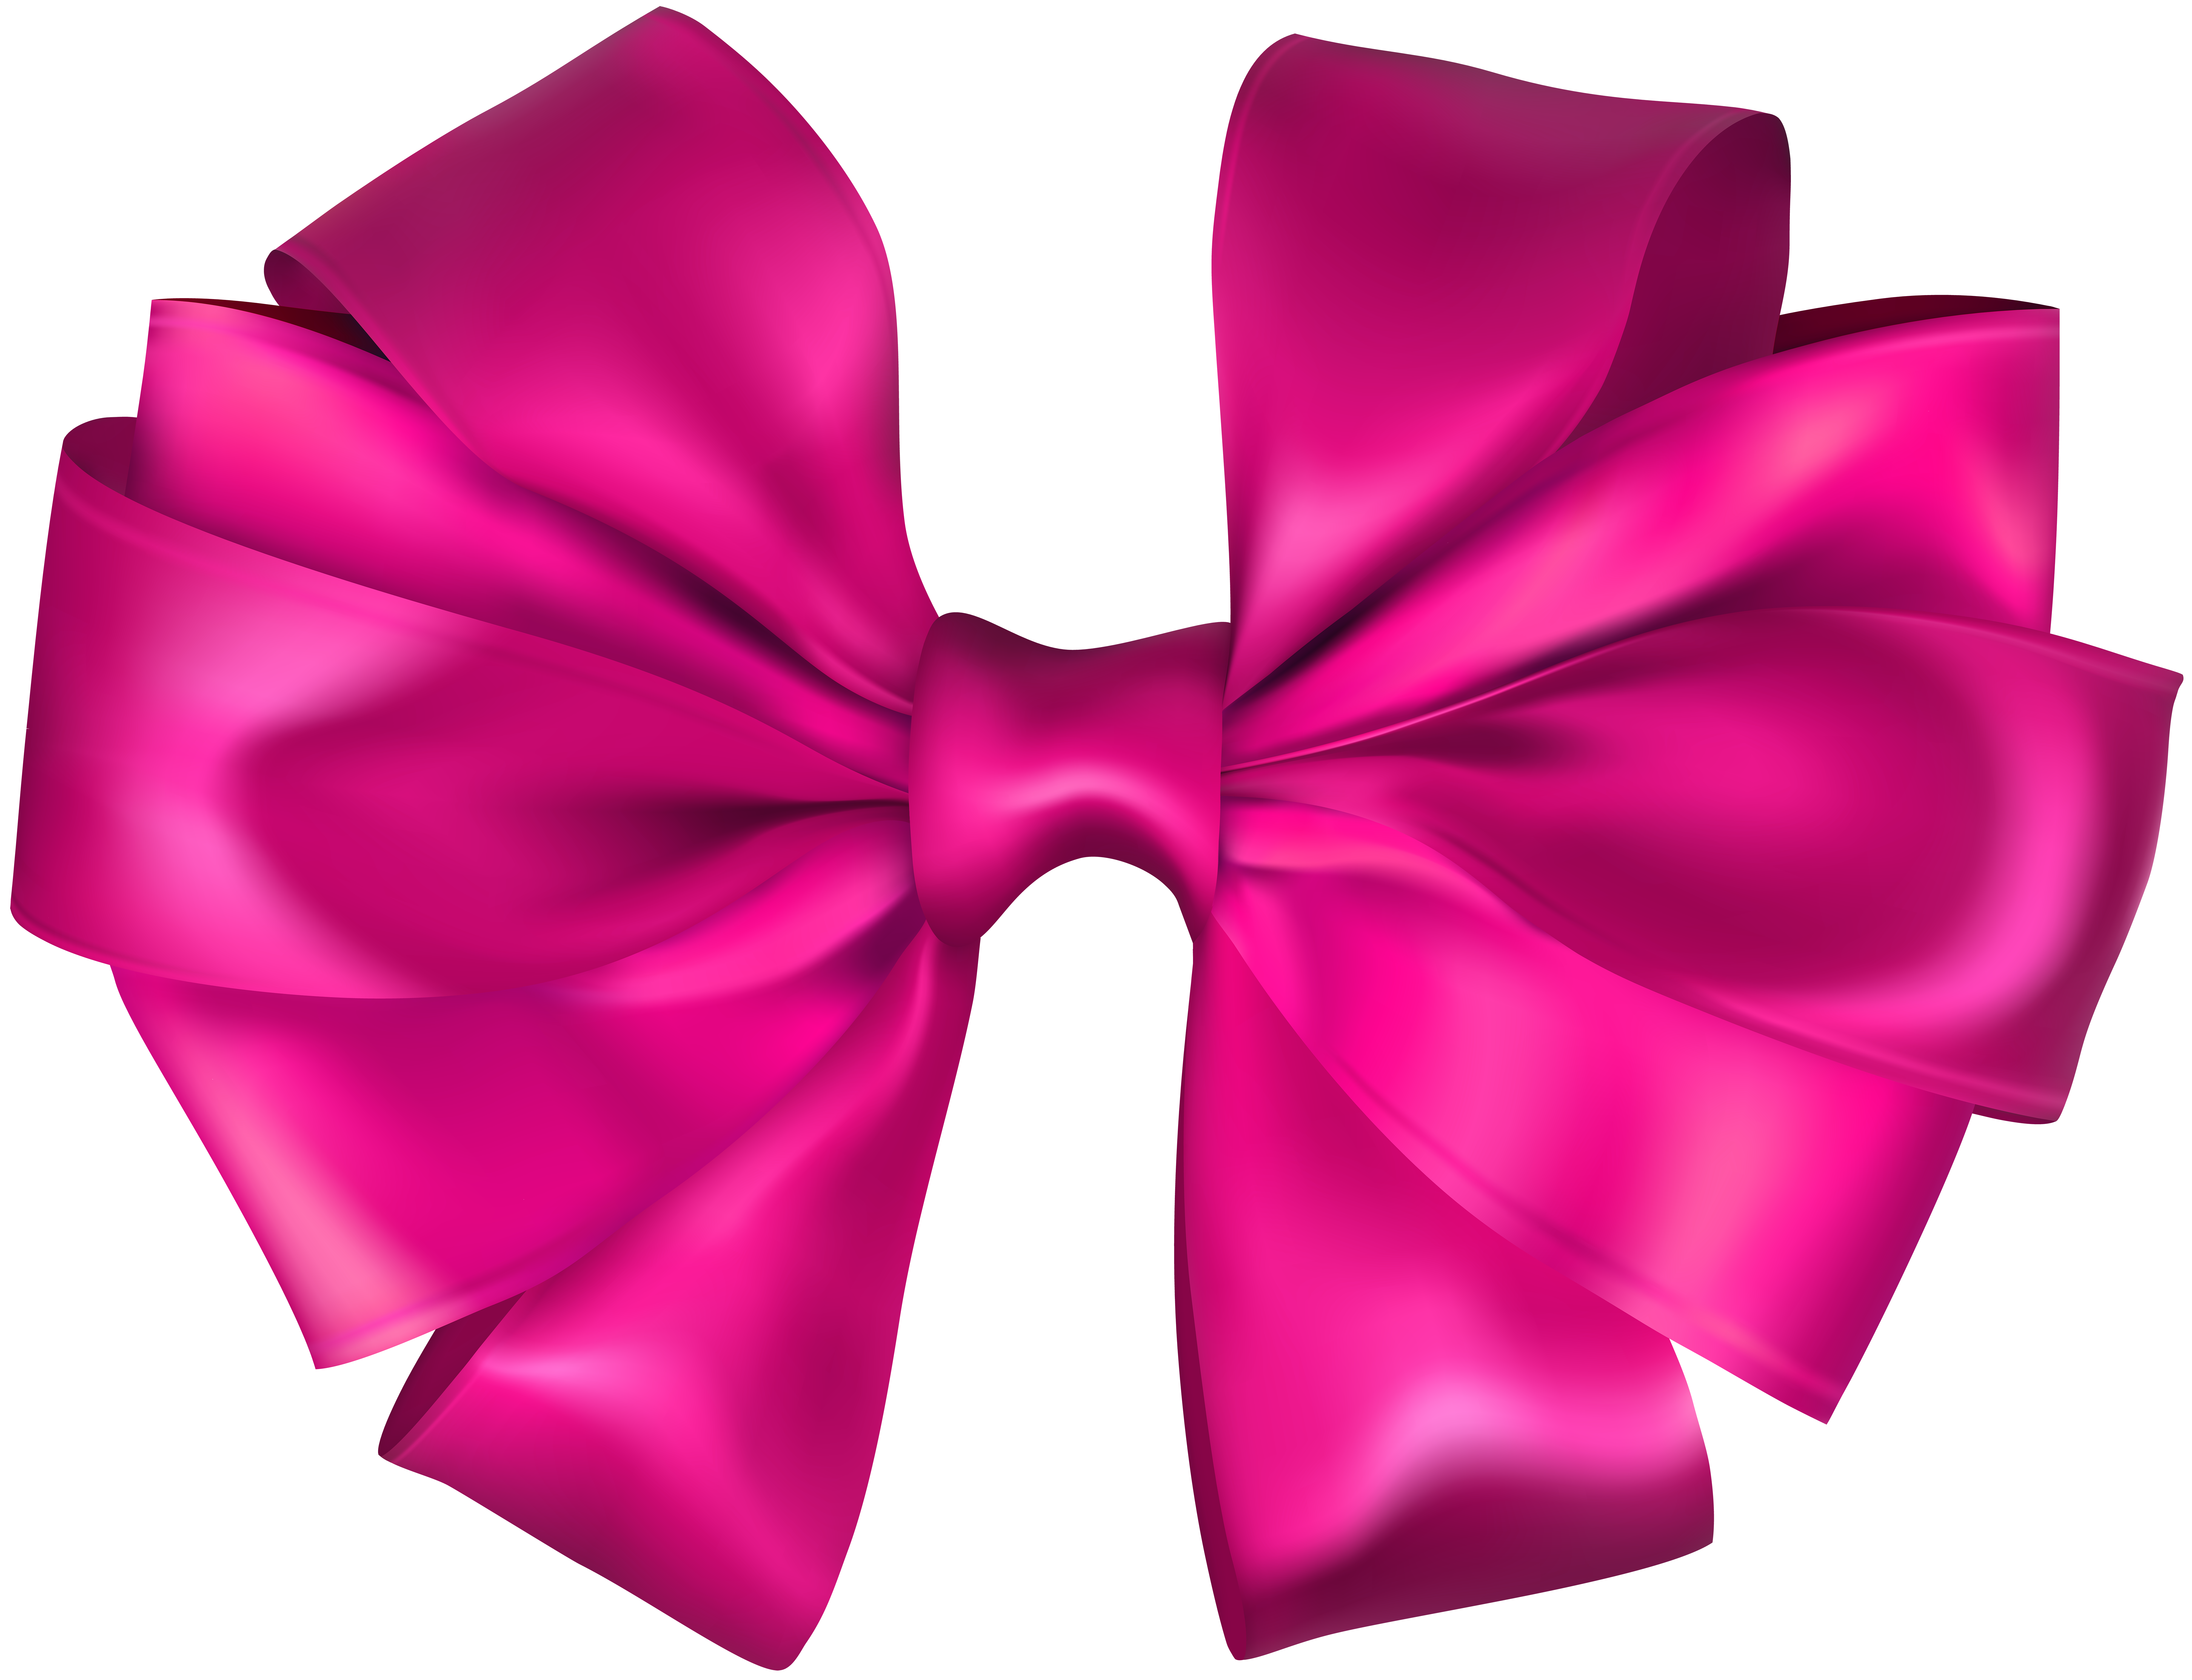 Pink Bow Transparent Clip Art Image​, Gallery Yopriceville - High-Quality  Images and Transparent PNG Free Clipart